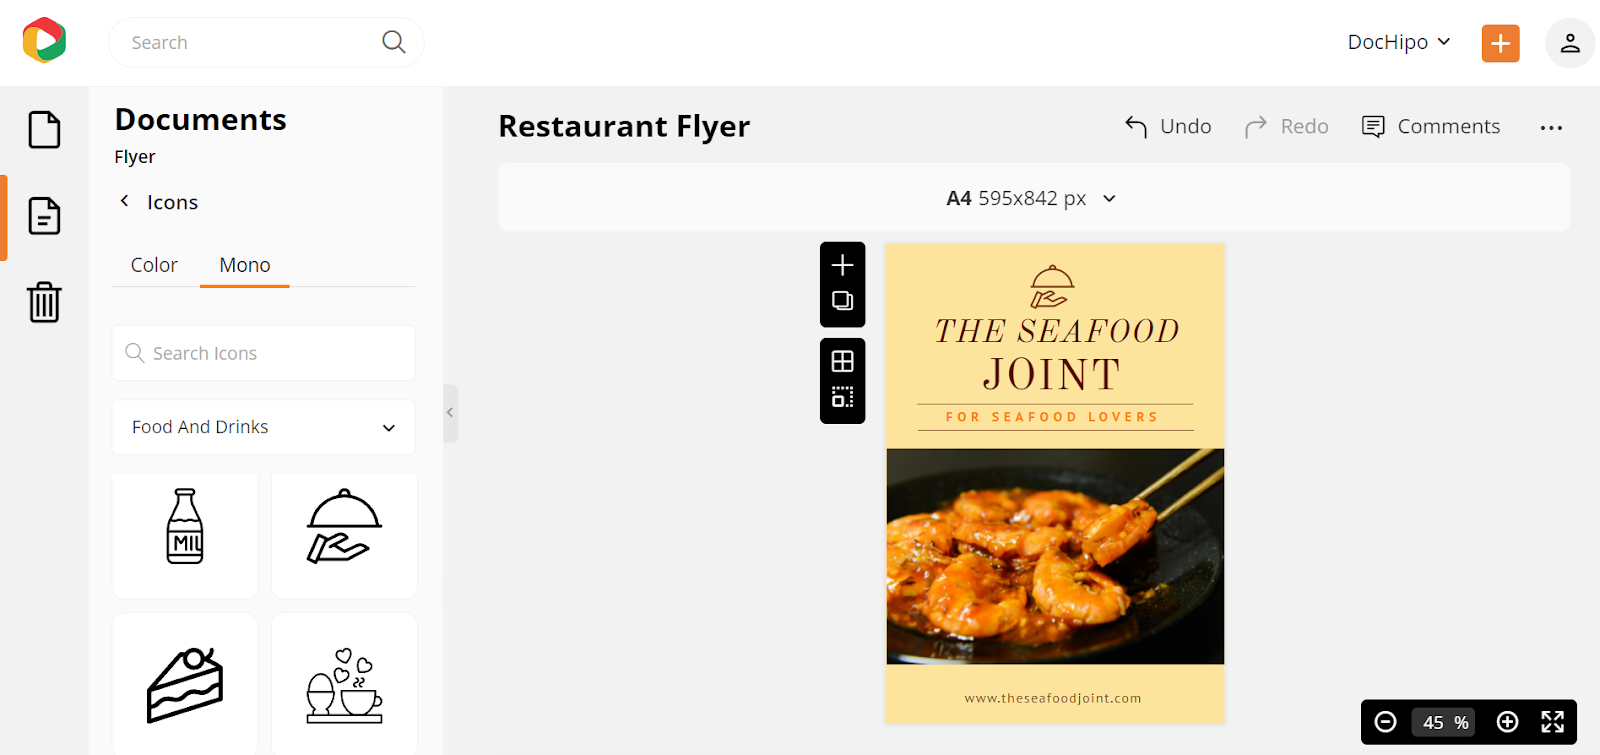 Restaurant Flyer Design after resizing, repositioning, and changing the color of the icon